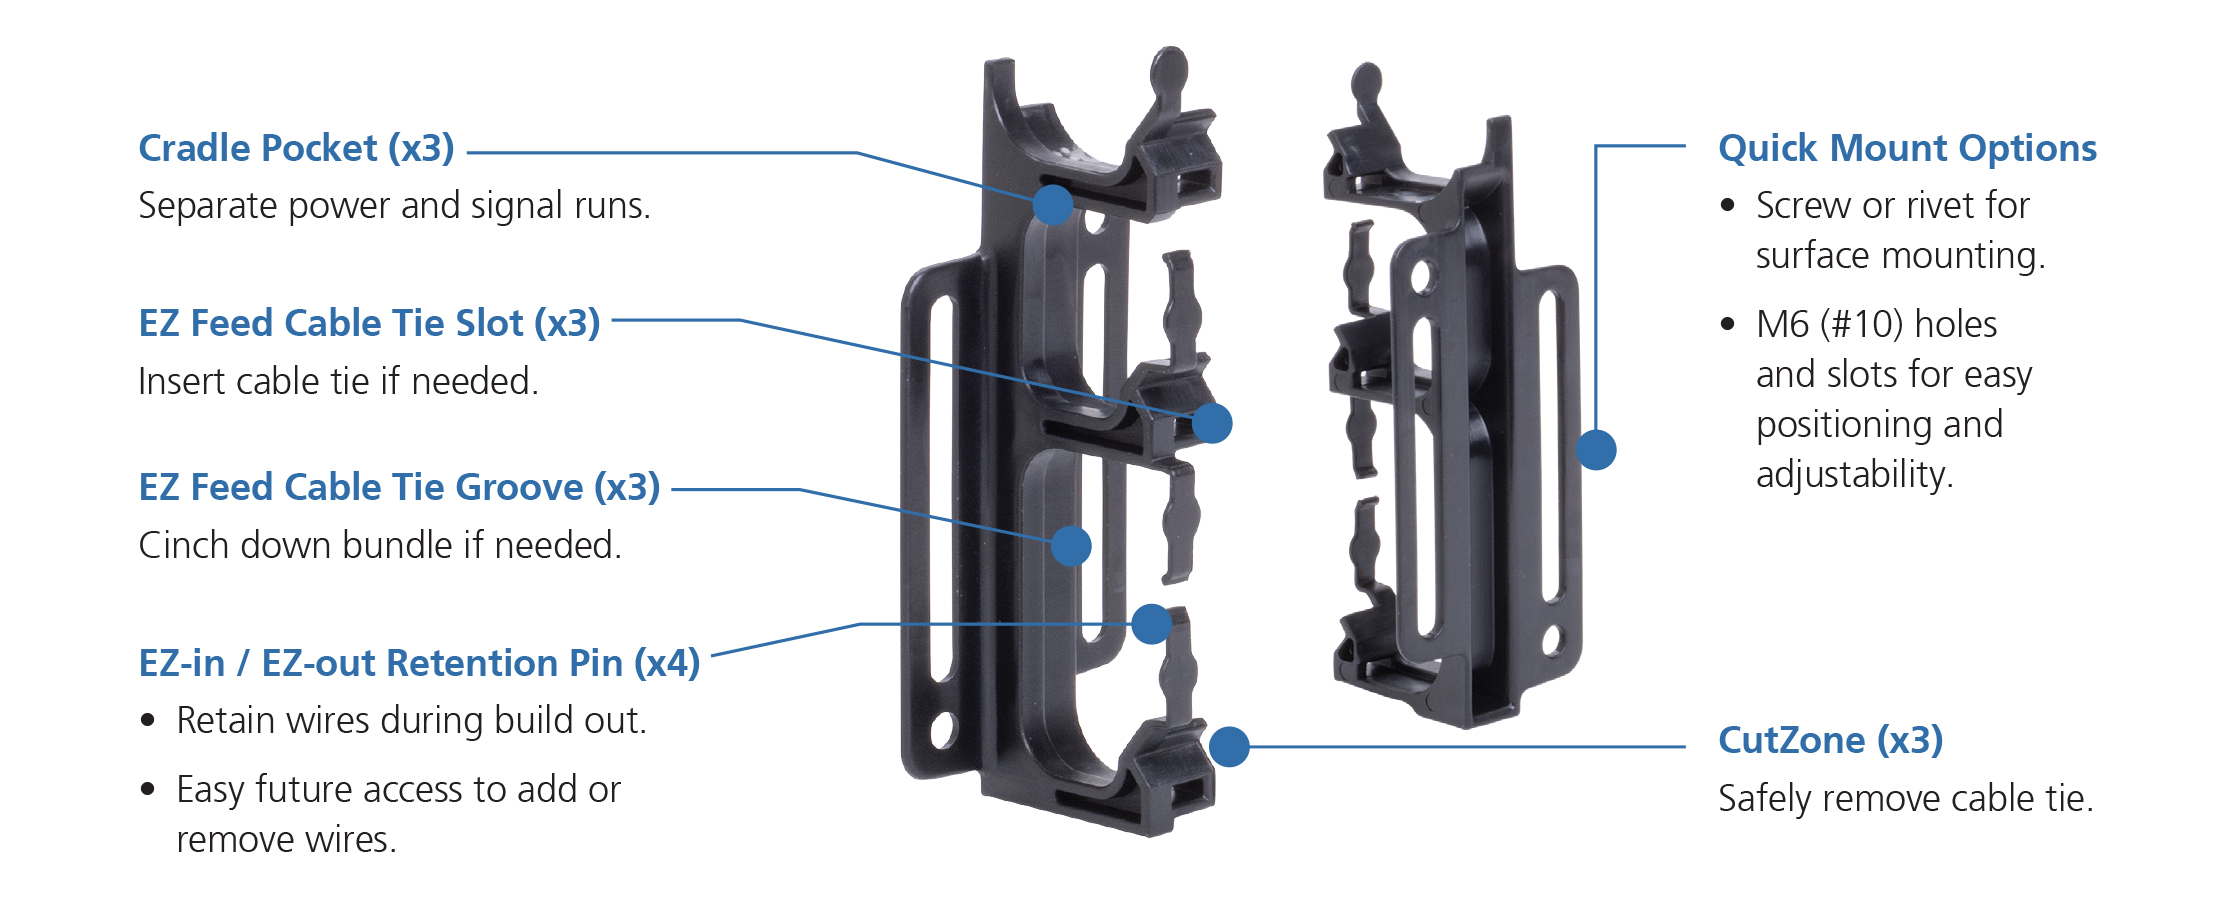 Cable Stacker Features